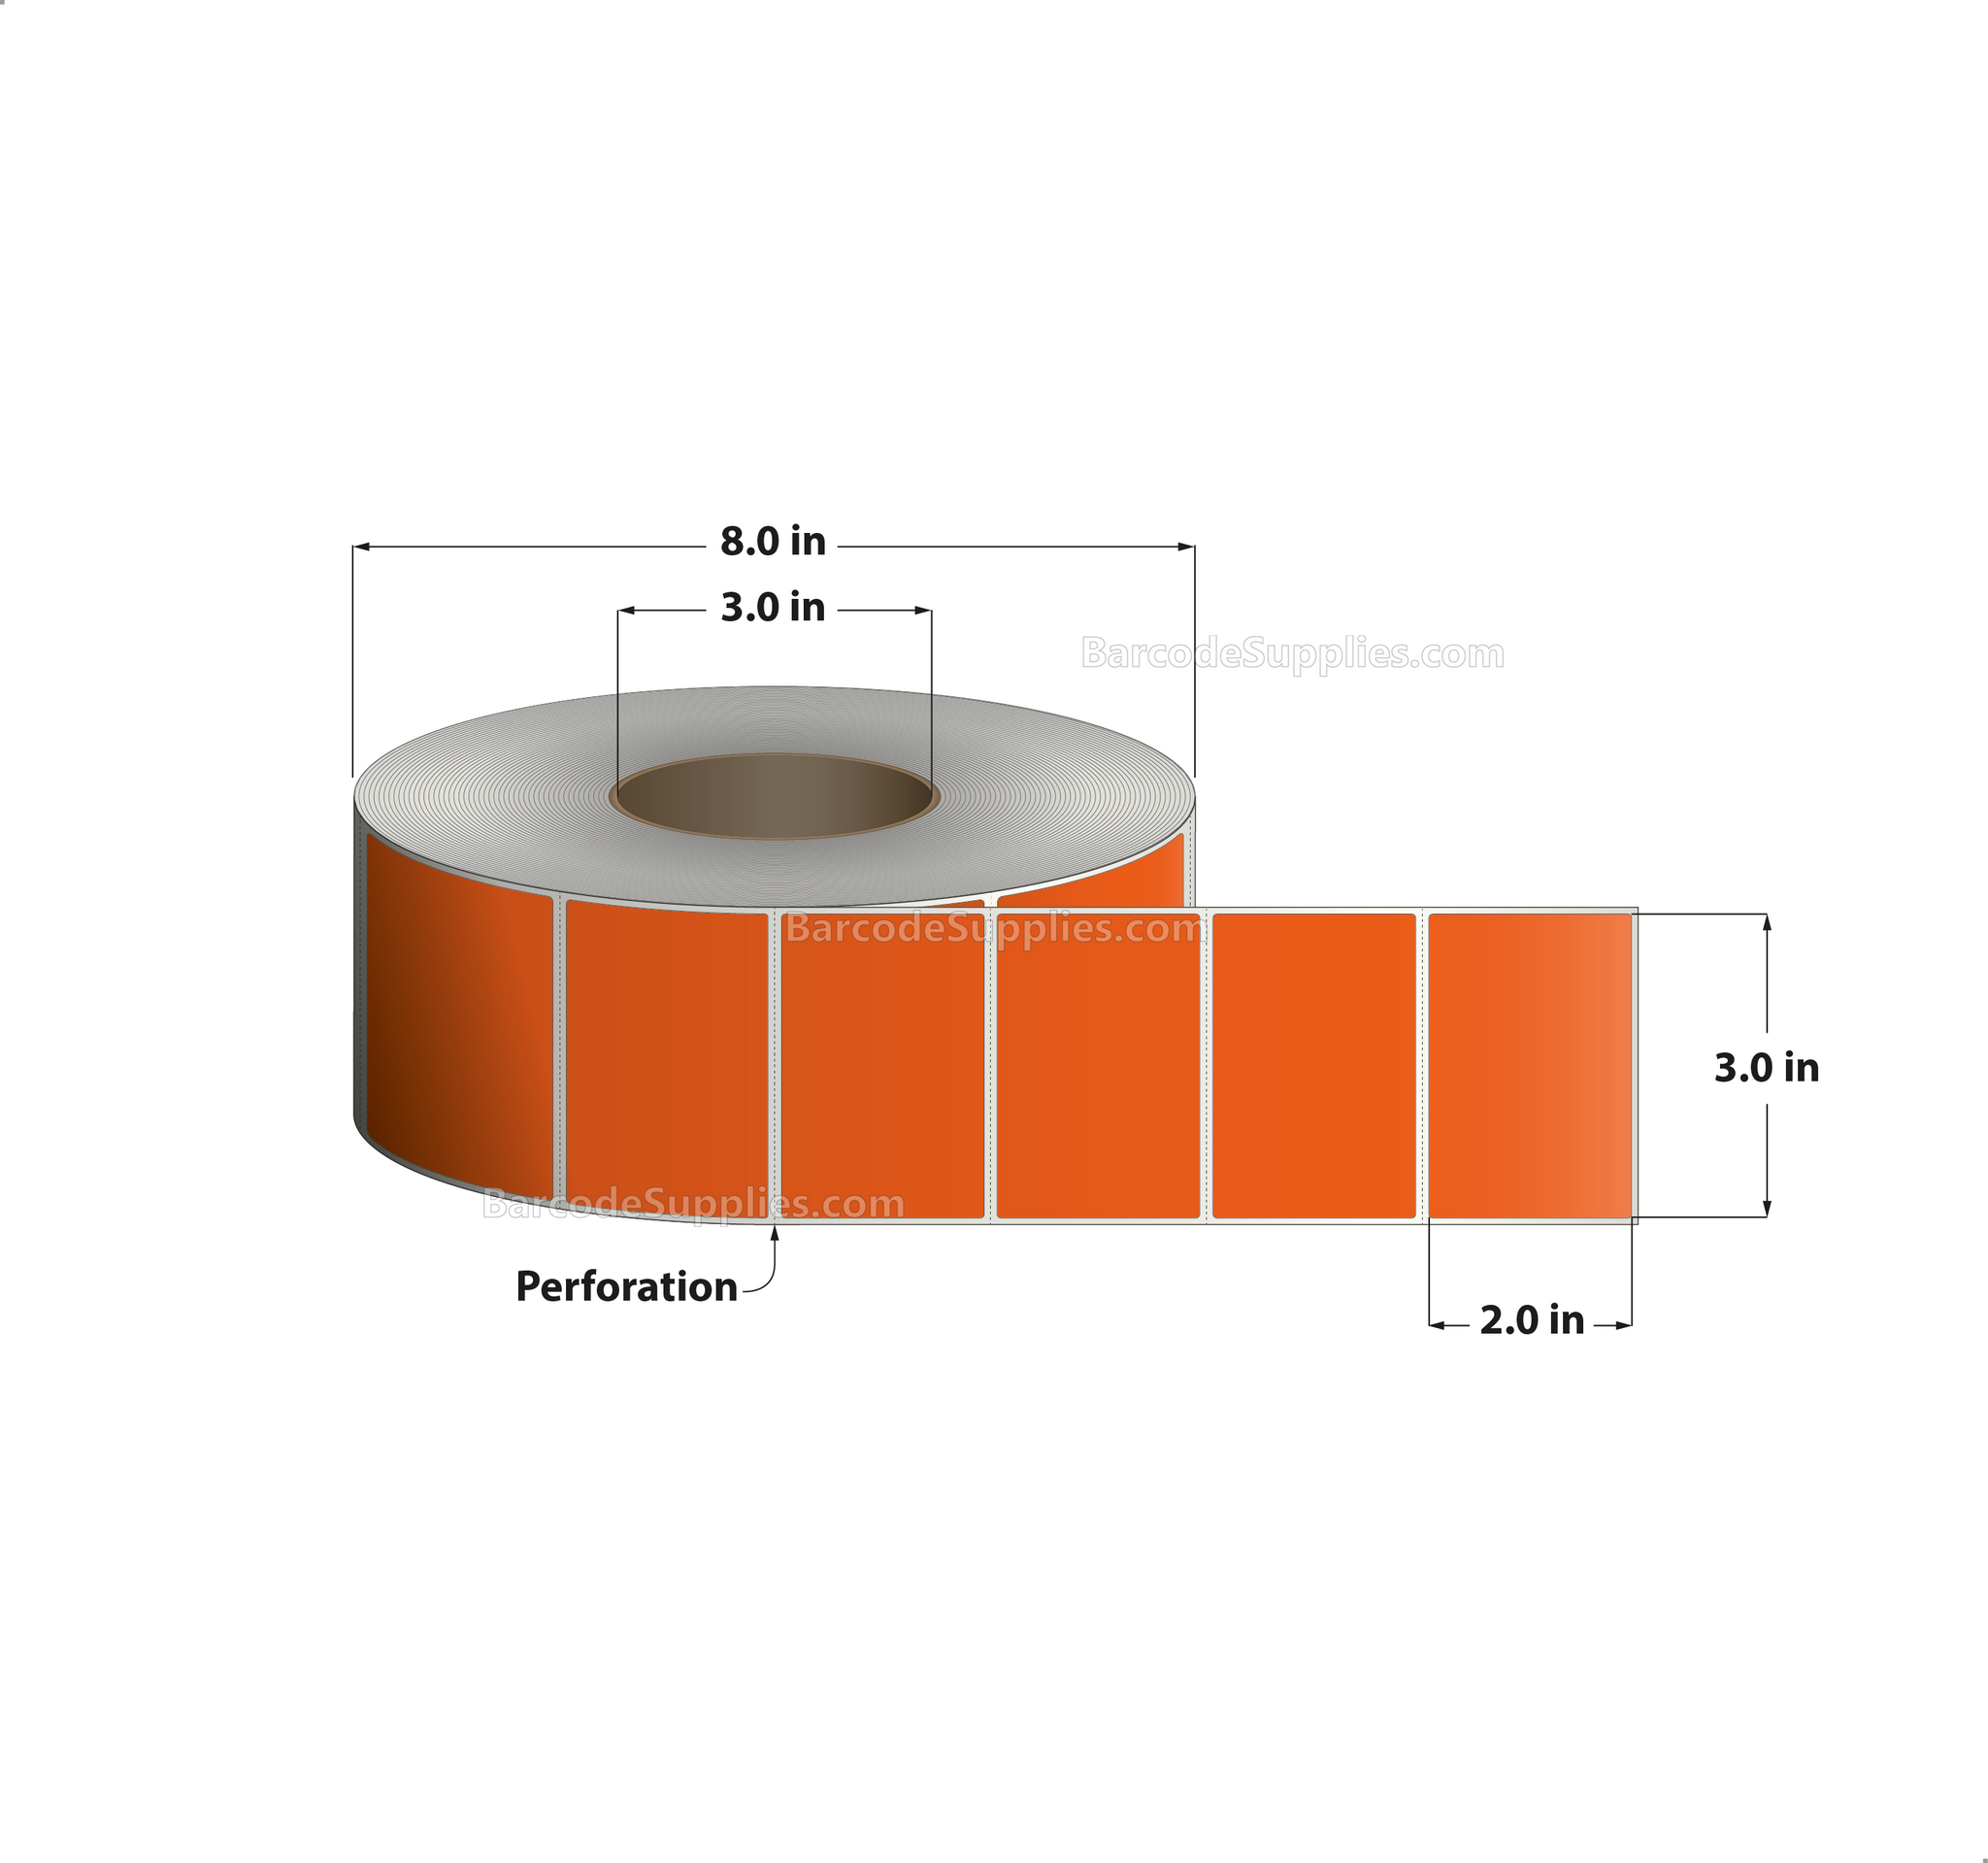 3 x 2 Thermal Transfer 1495 Orange Labels With Permanent Adhesive - Perforated - 2900 Labels Per Roll - Carton Of 8 Rolls - 23200 Labels Total - MPN: RFC-3-2-2900-OR